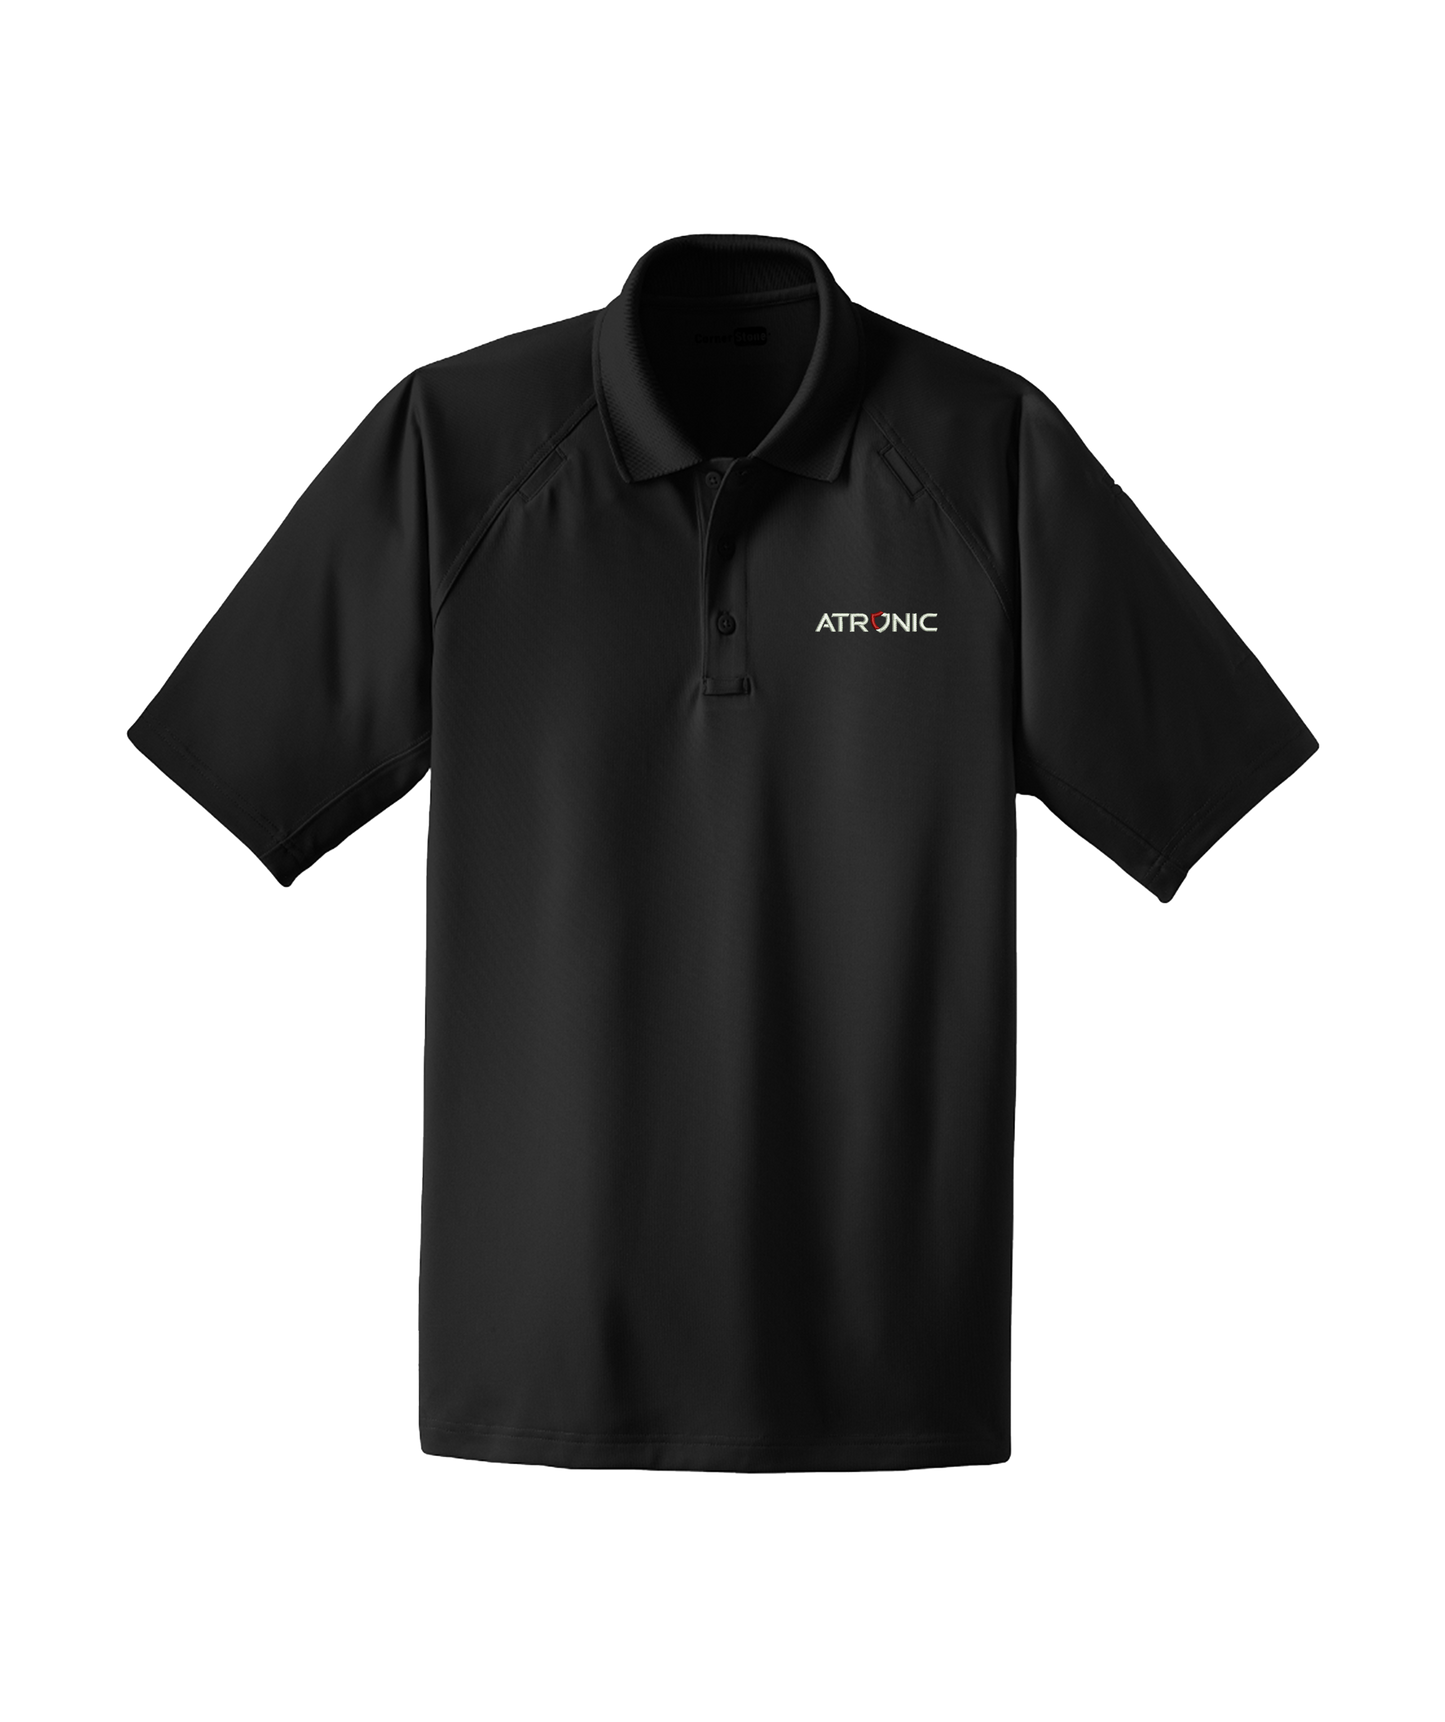 CornerStone® Tall Select Snag-Proof Tactical Polo